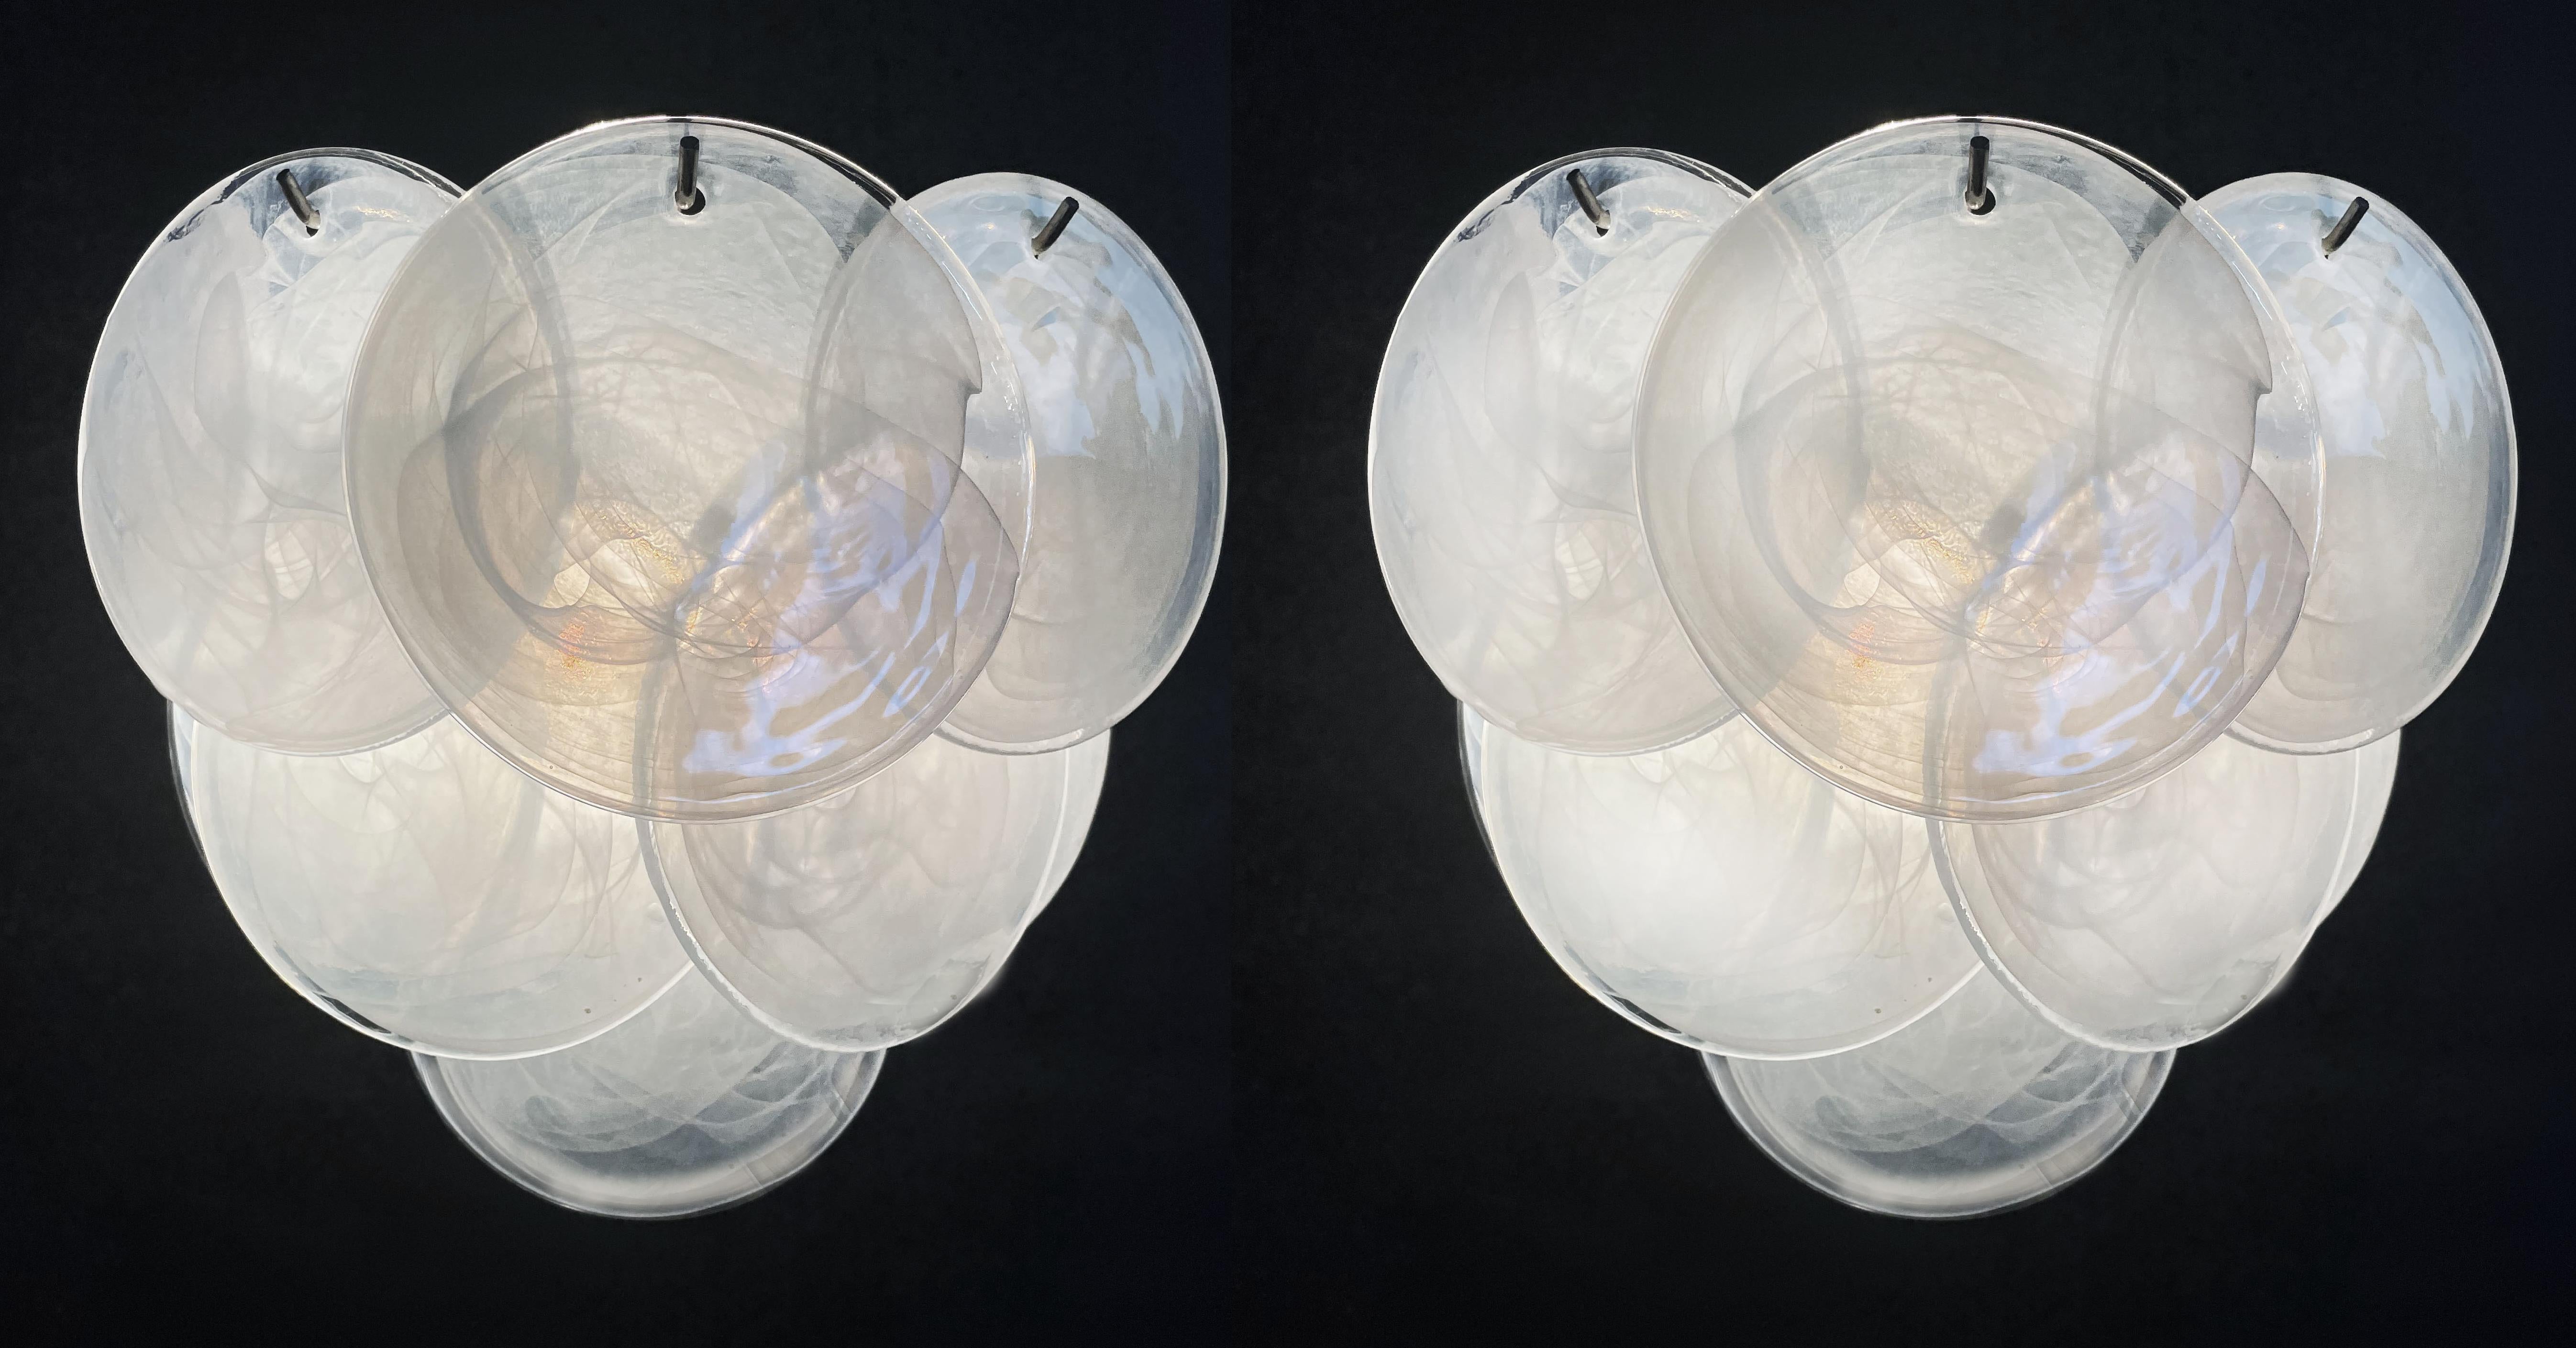 Pair  Italian Murano sconces in Vistosi style. Wall lights have 10 alabaster iridescent glasses for each. Nickel metal frame.
Period: late XX century
Dimensions:11 inches (28 cm) height; 13,40 inches (34 cm) width; 7,10 inches (18 cm) depth from the